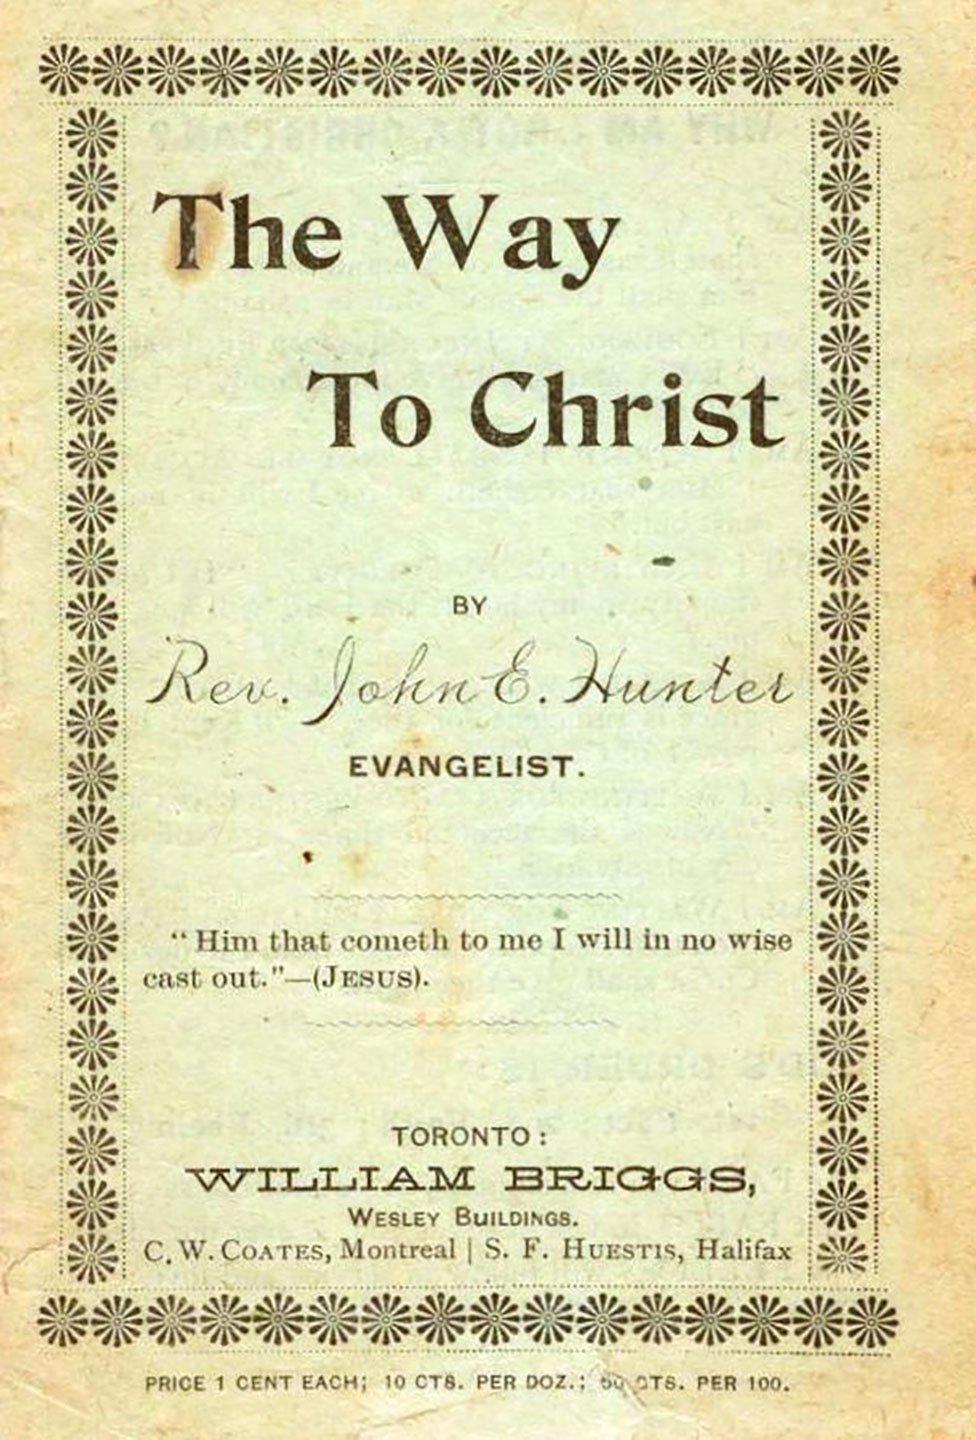 The Way To Christ